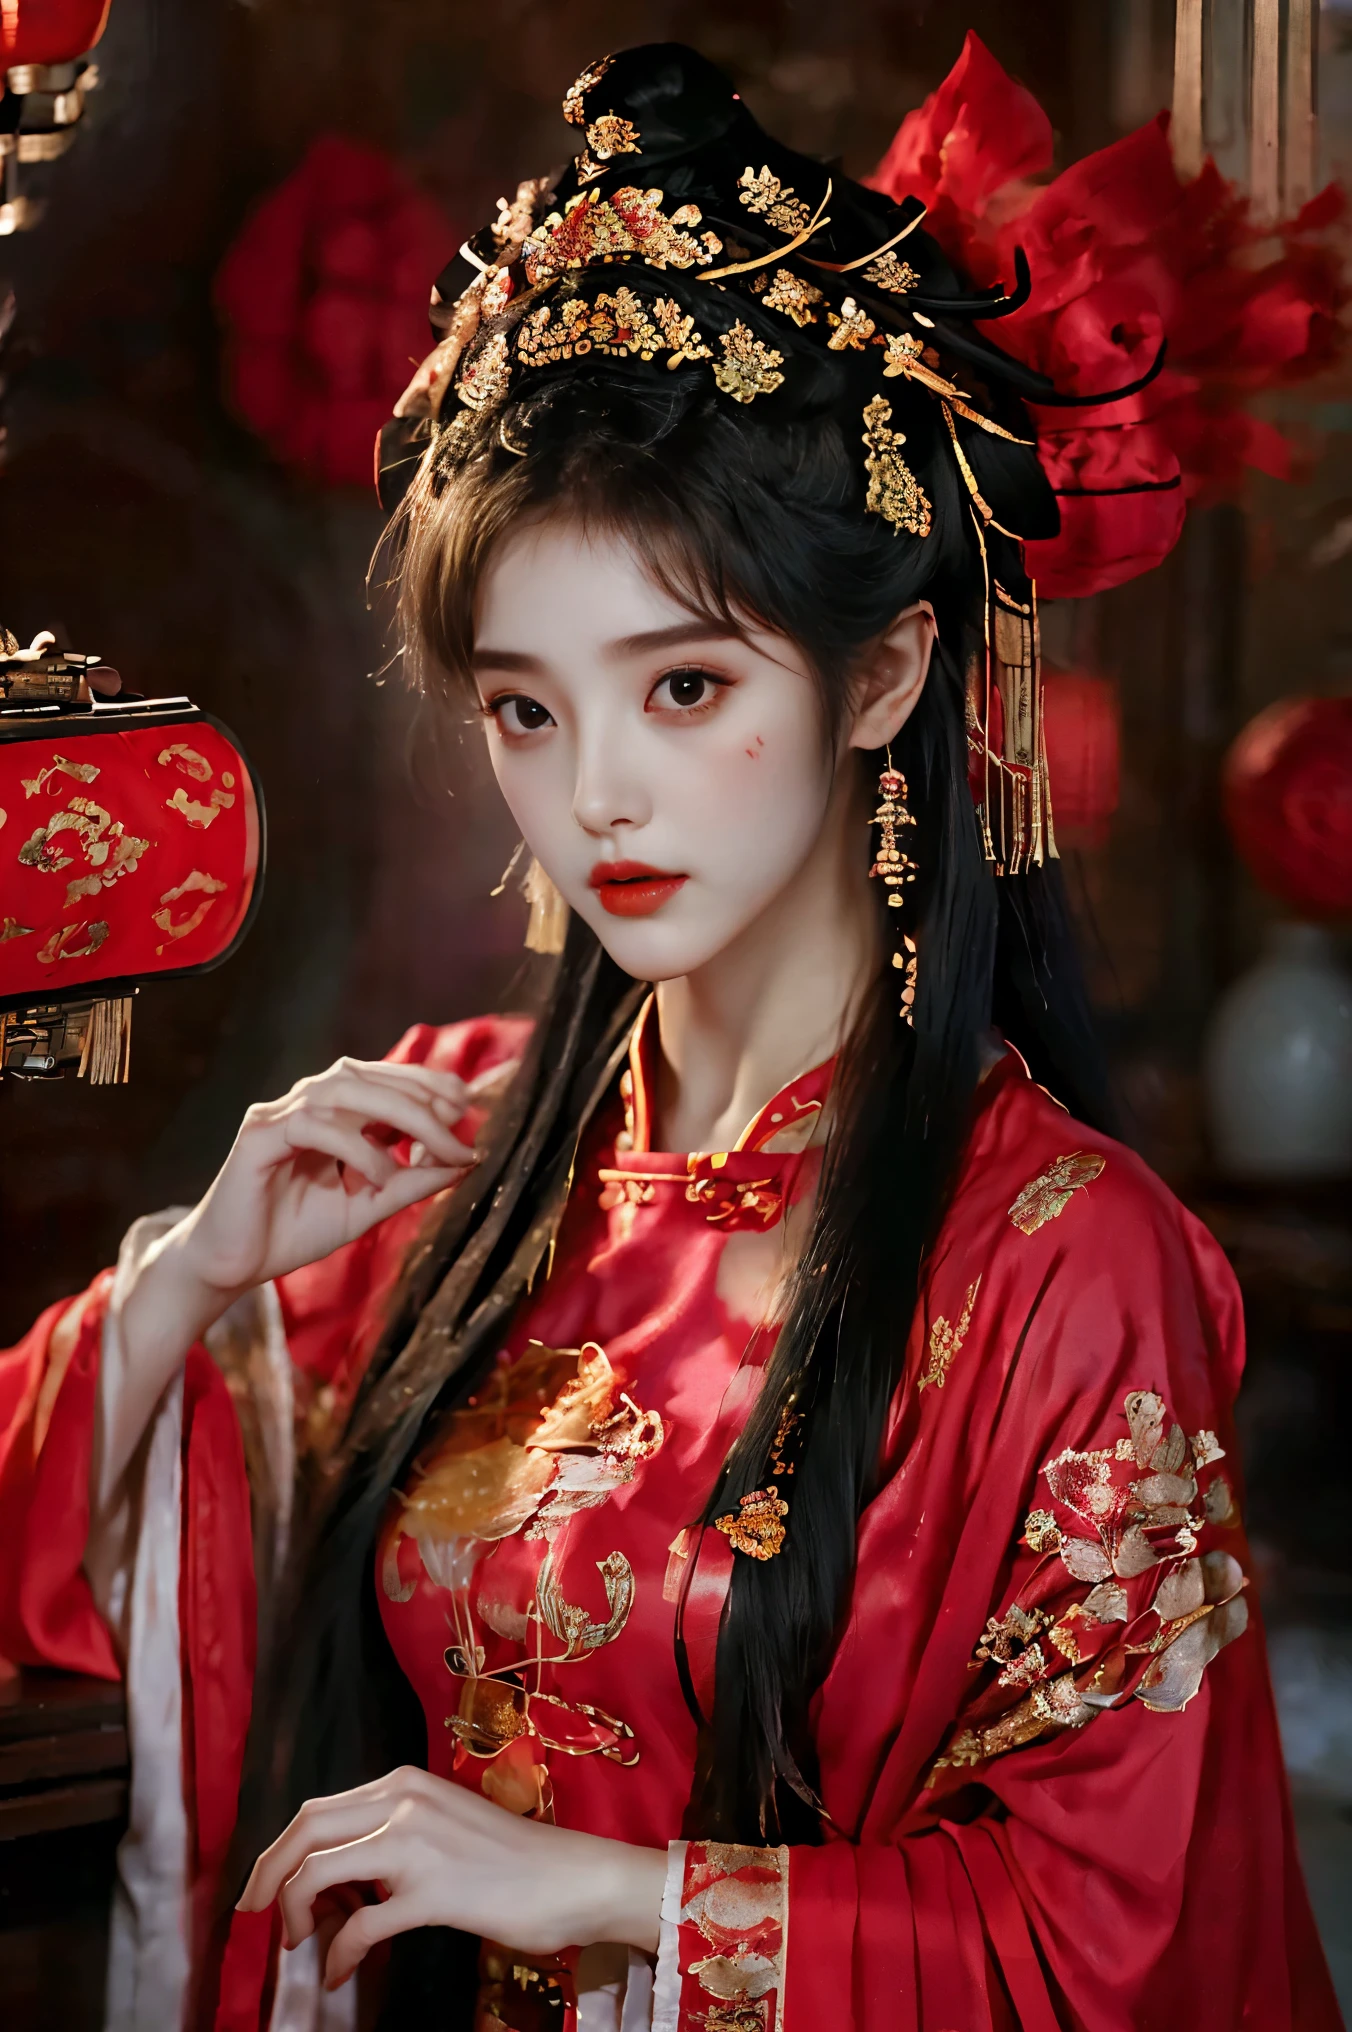 1girl, 20 years old, center, Black long hair, Red lips, Perfect thighs, Chinese Queen, Gold embroidery clothing, Red cheongsam, Lace, Red cape, Red embroidered shoes, (Look into the camera:1.5), stand up, night, Wooden pavilion, Chinese Palace, Front view, curls, Hair flying, Gloomy sky, beautiful right eye pupil, (Very delicate and beautiful Korean female facial features:1.3), (Beautiful and detailed description of eyes), Best picture quality, Movie Lighting, Detailed background, Surrealism, rococo style, Art Deco, dutch angle, masterpiece, UHD, masterpiece, ccurate, anatomically correct, textured skin, super detail, high details, award winning, best quality, 8k, gufeng